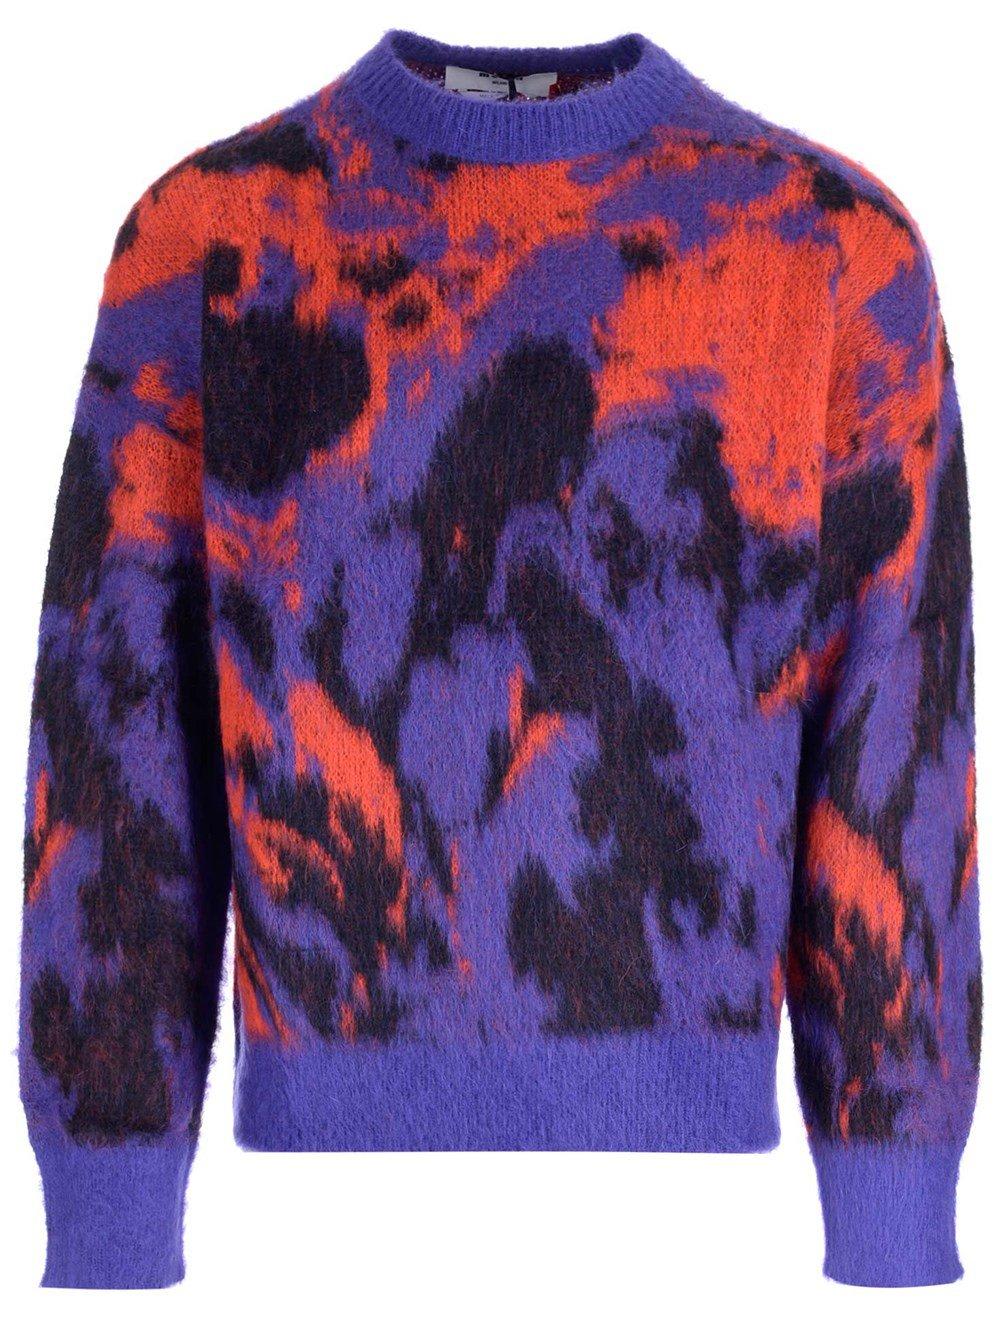 MSGM Abstract Graphic Jacquard Knit Jumper